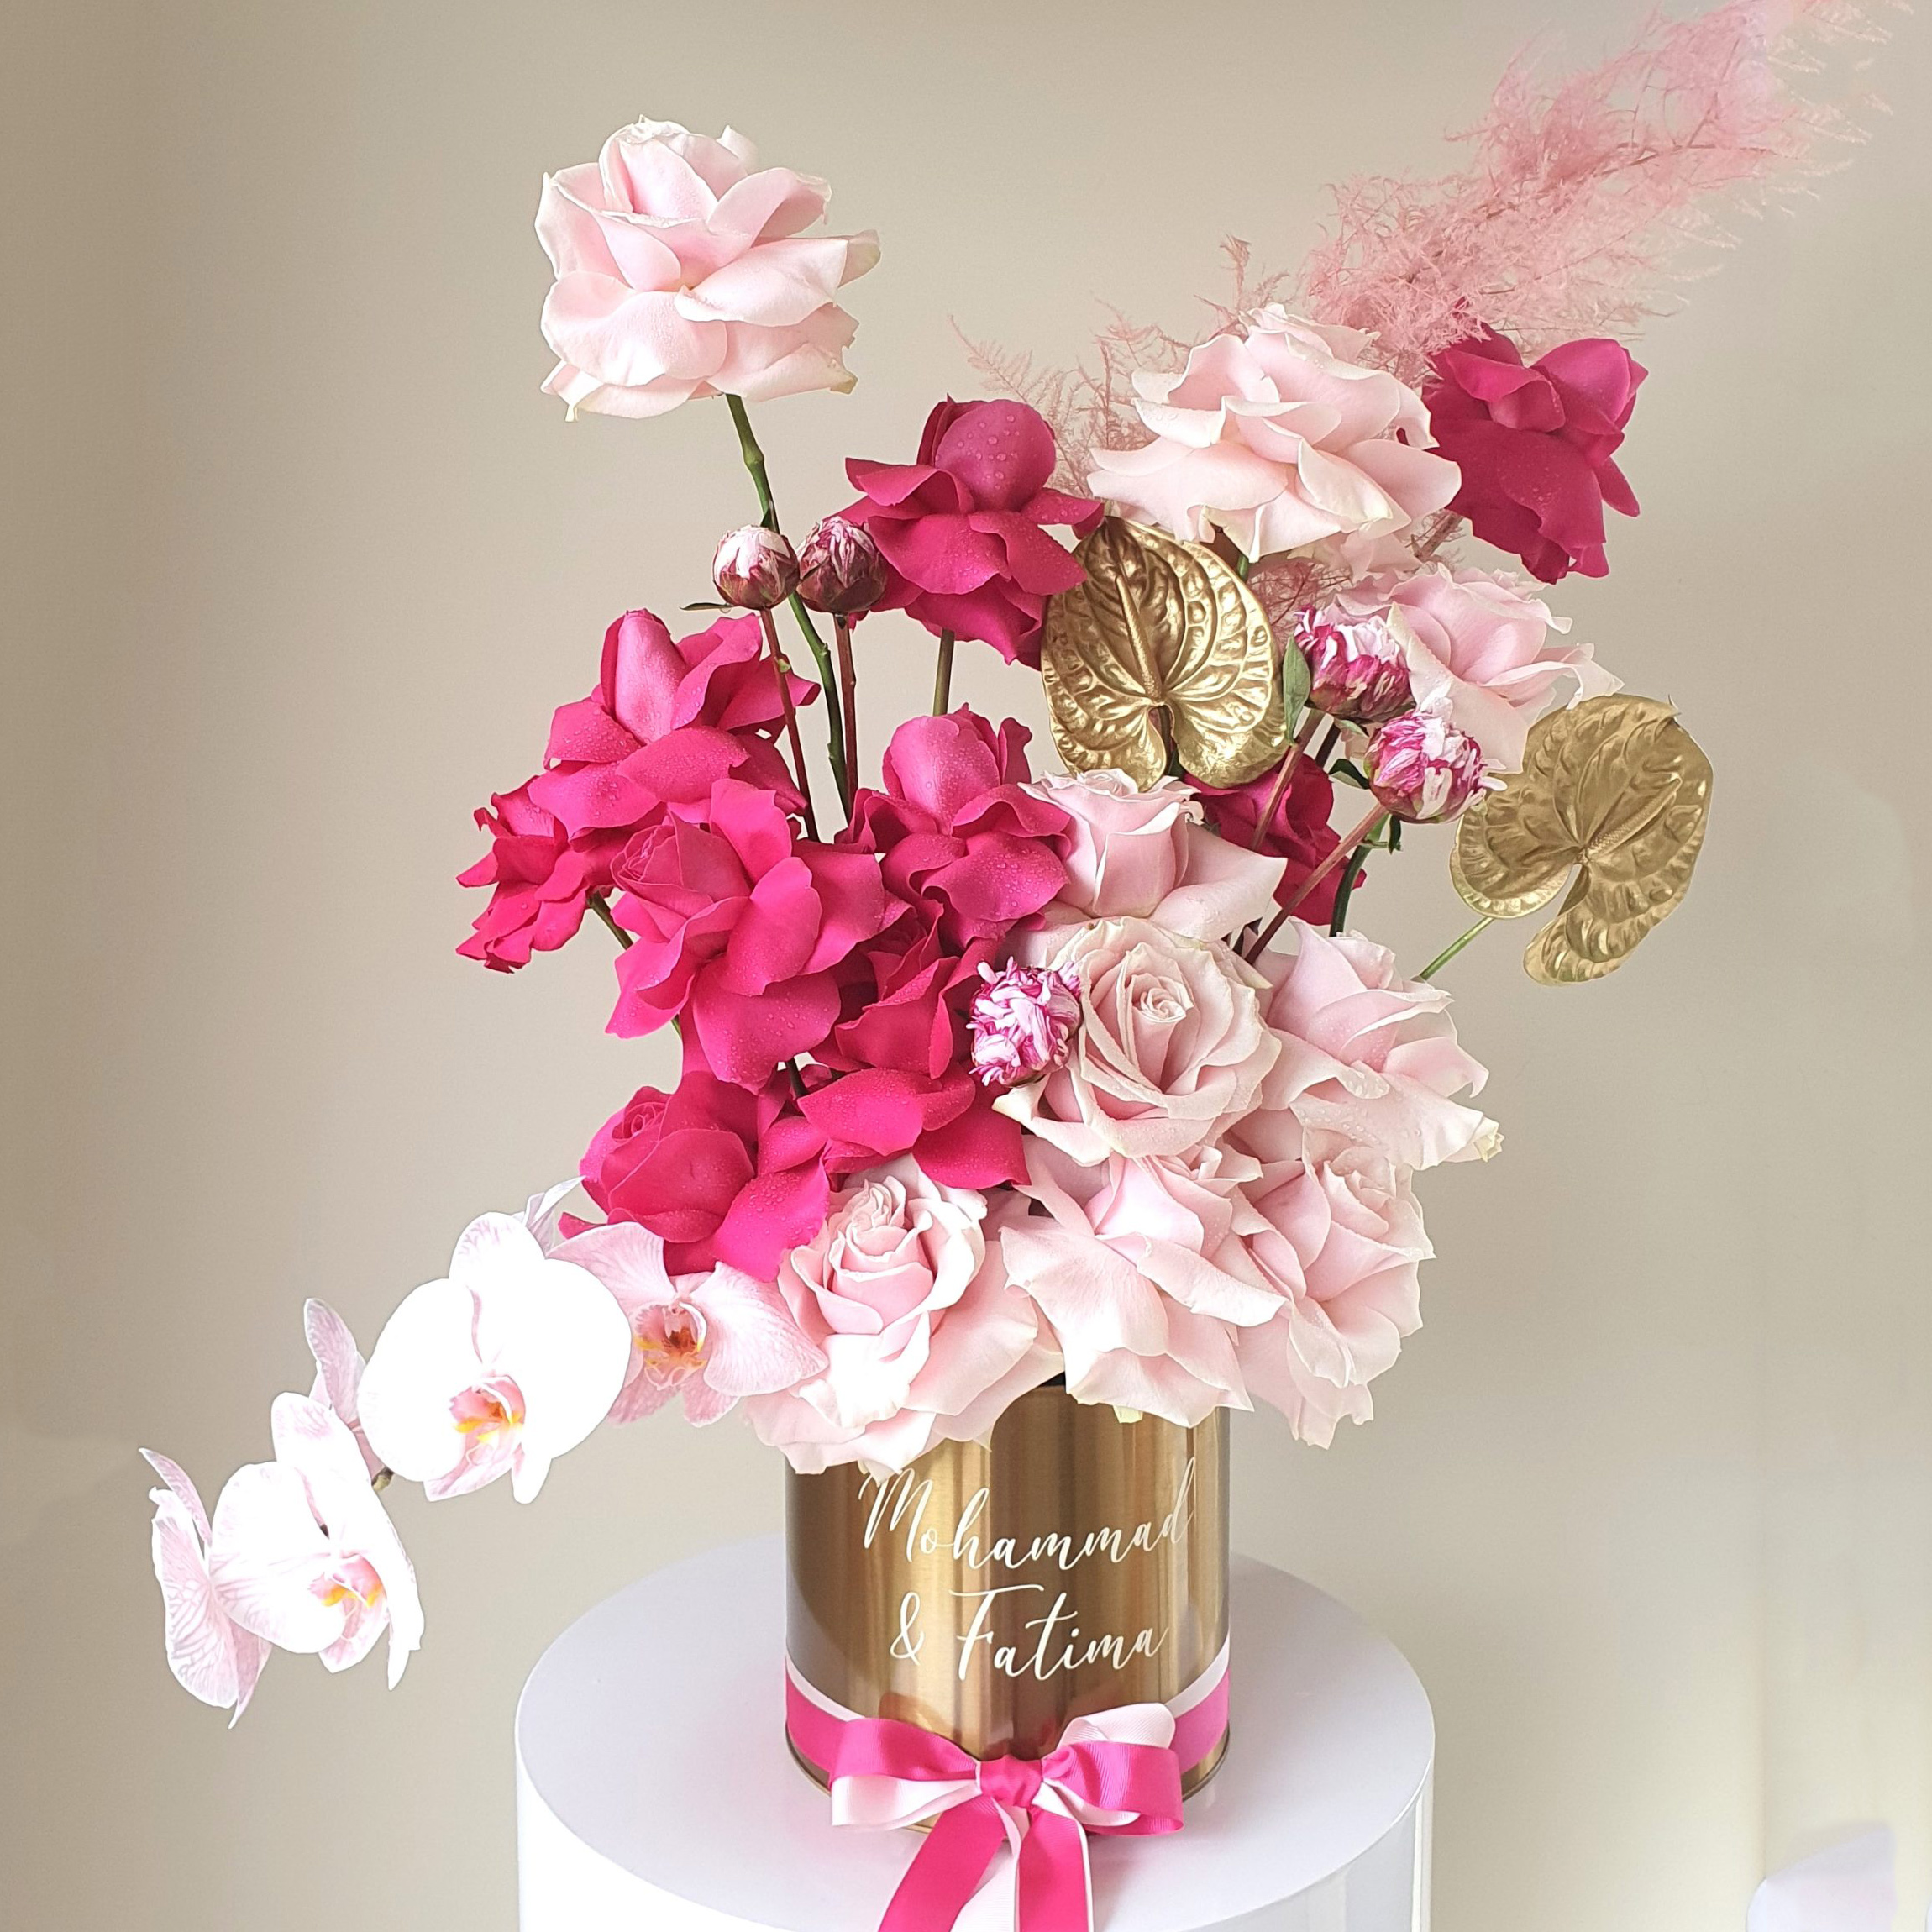 Luxury Flower Delivery Sydney